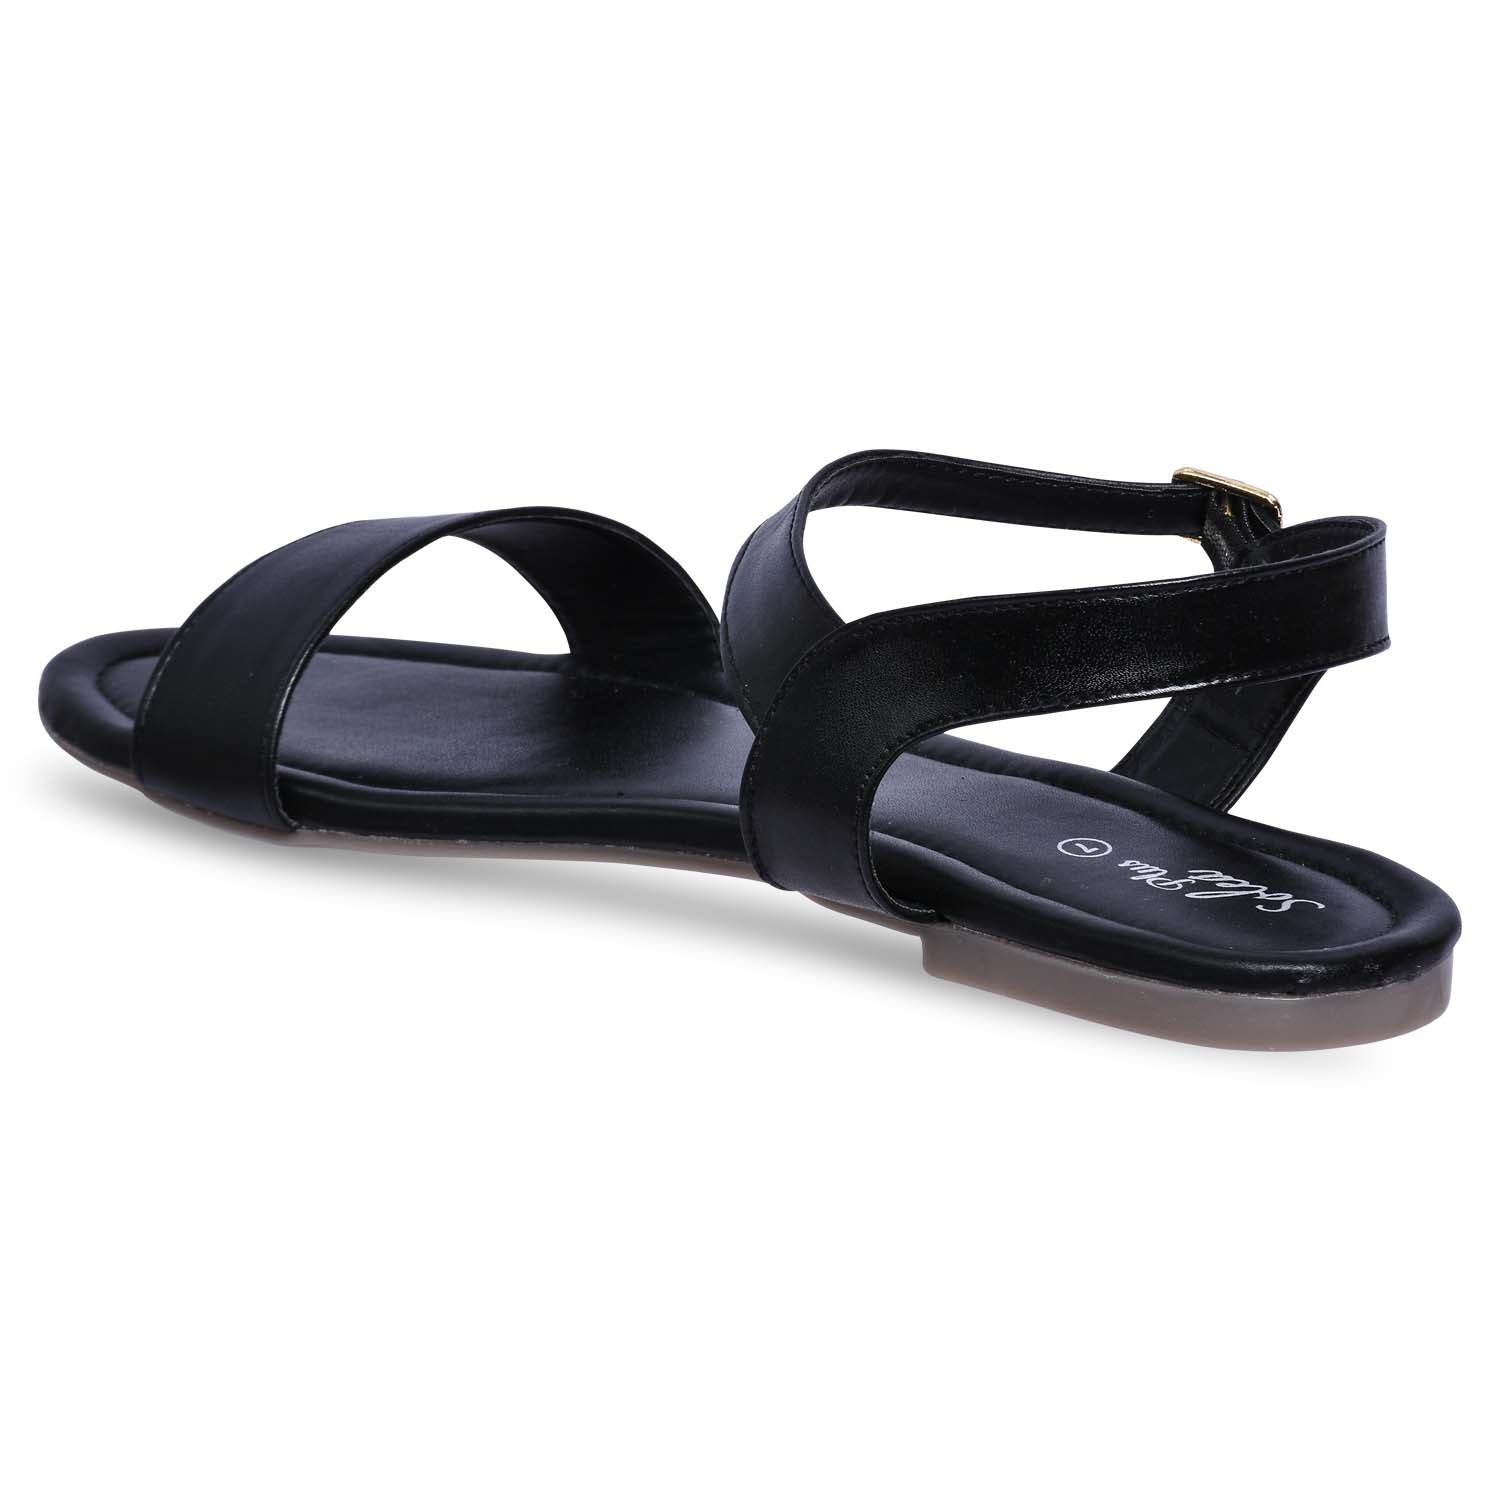 Paragon R1006L Women Sandals | Casual &amp; Formal Sandals | Stylish, Comfortable &amp; Durable | For Daily &amp; Occasion Wear